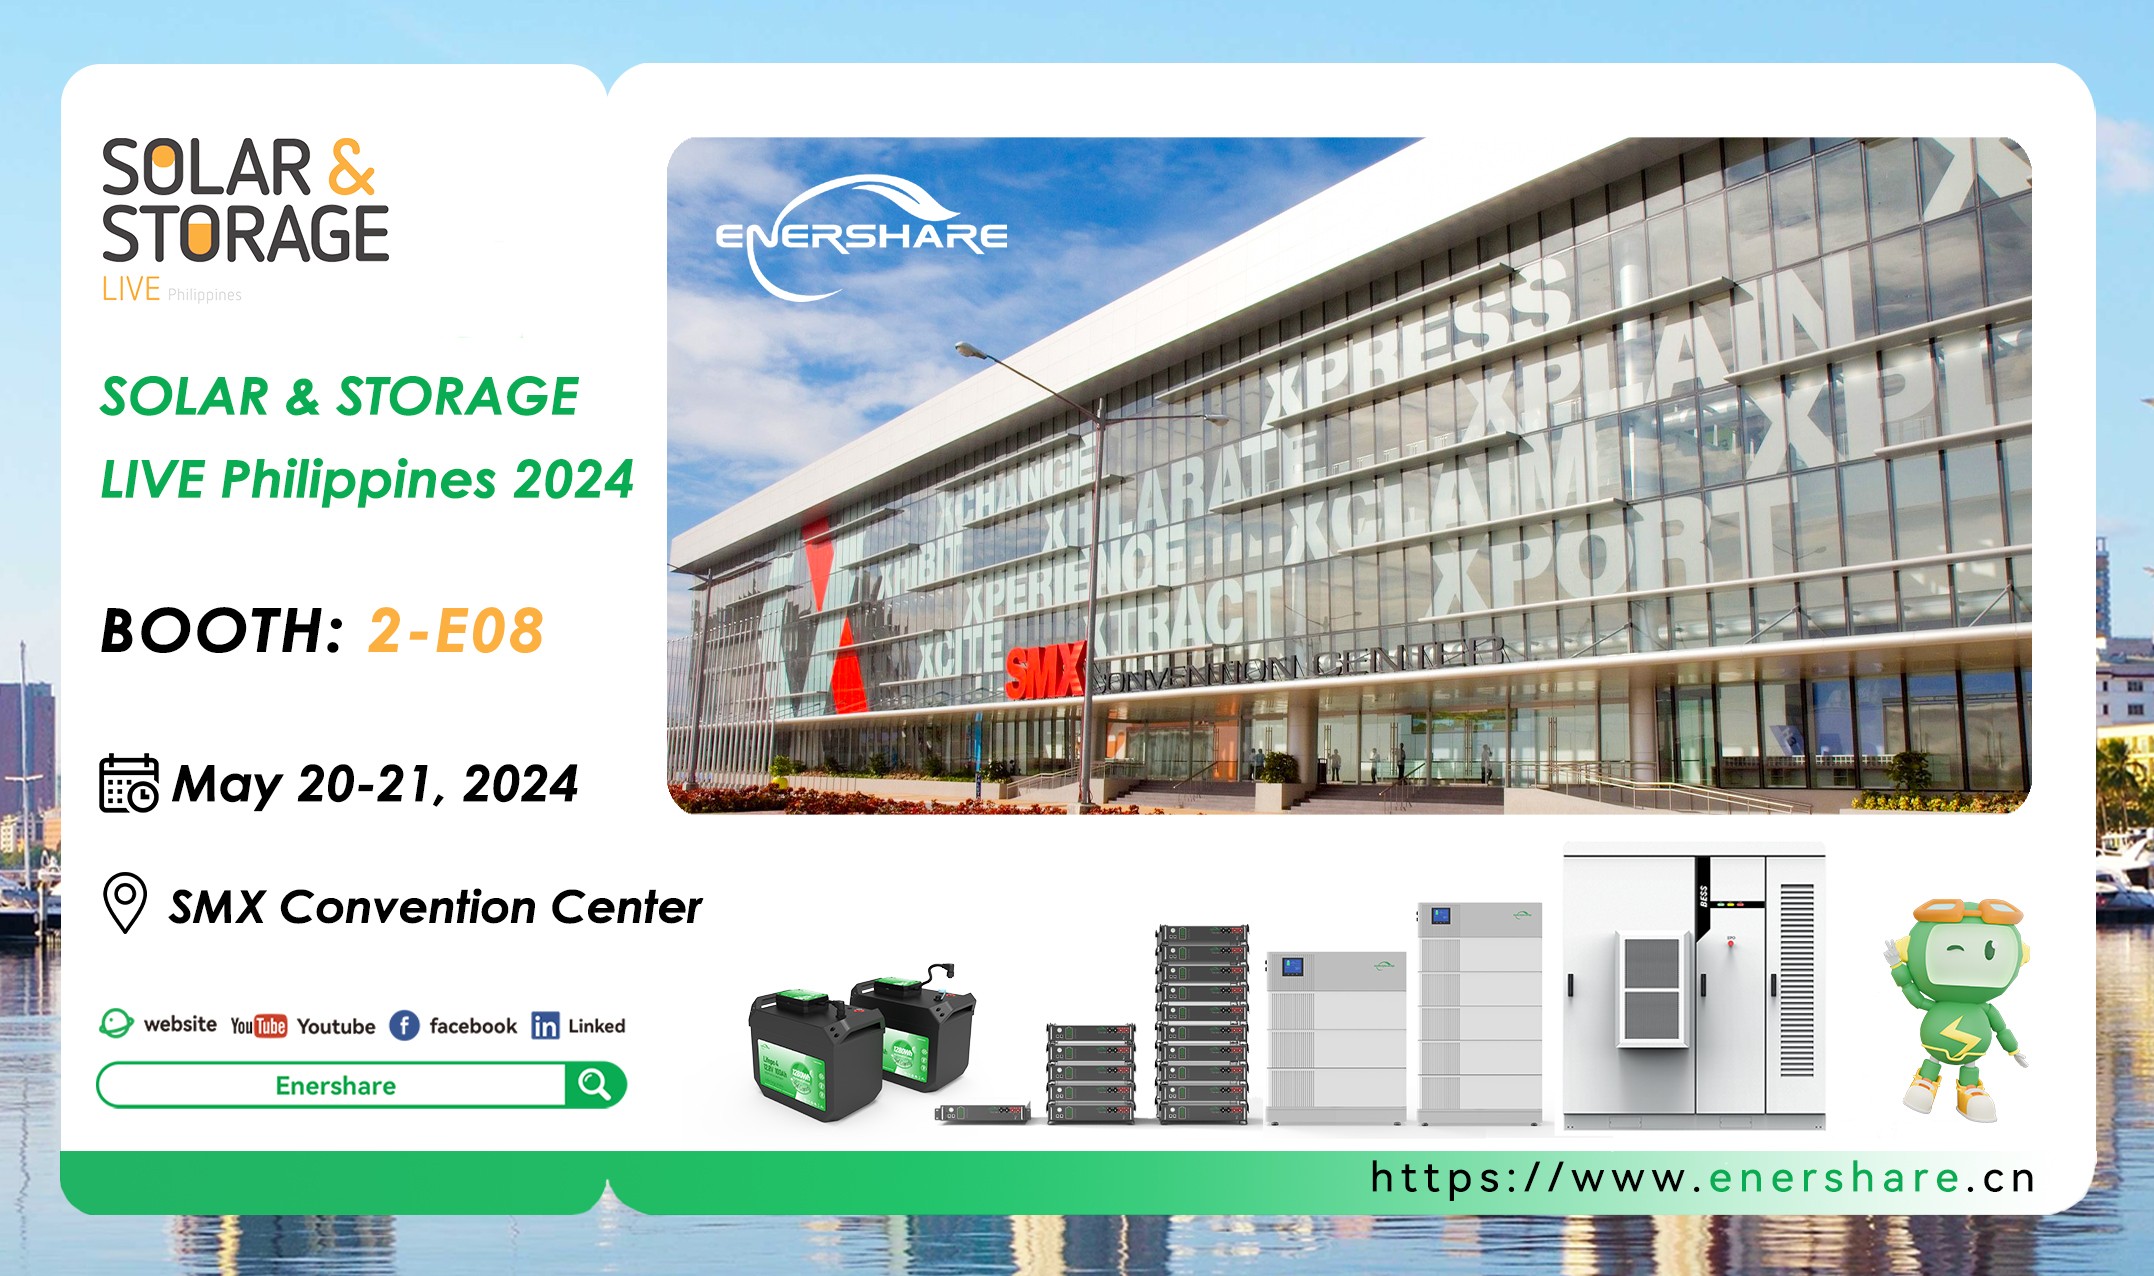 Enershare will be at Solar & Storage Live Philippines 2024!